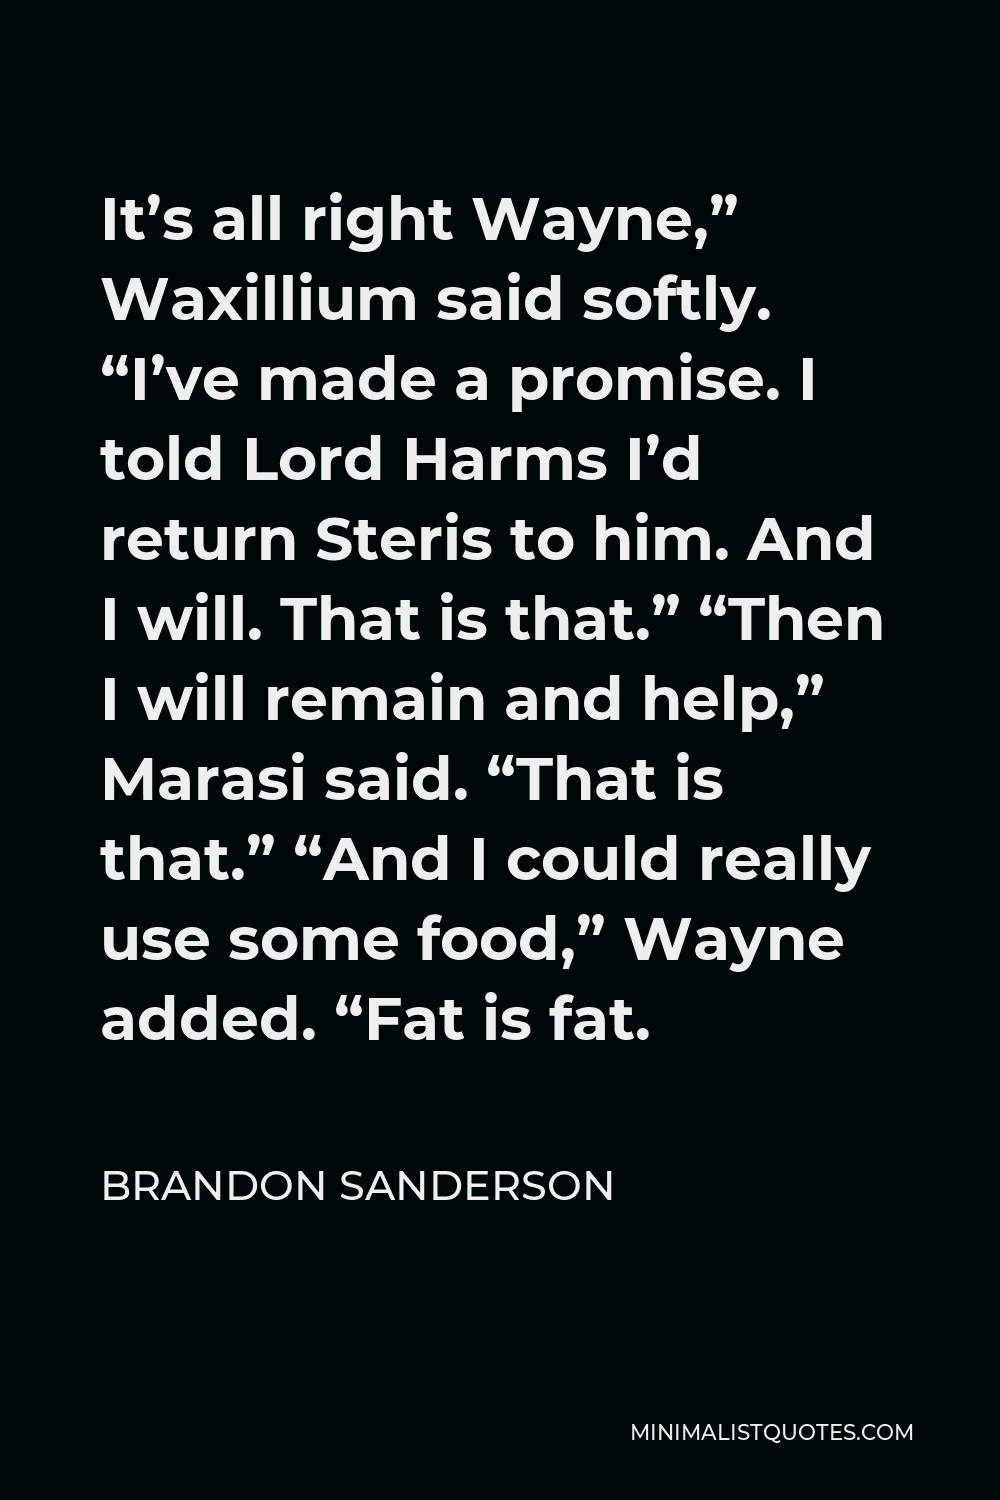 Brandon Sanderson Quote - It’s all right Wayne,” Waxillium said softly. “I’ve made a promise. I told Lord Harms I’d return Steris to him. And I will. That is that.” “Then I will remain and help,” Marasi said. “That is that.” “And I could really use some food,” Wayne added. “Fat is fat.